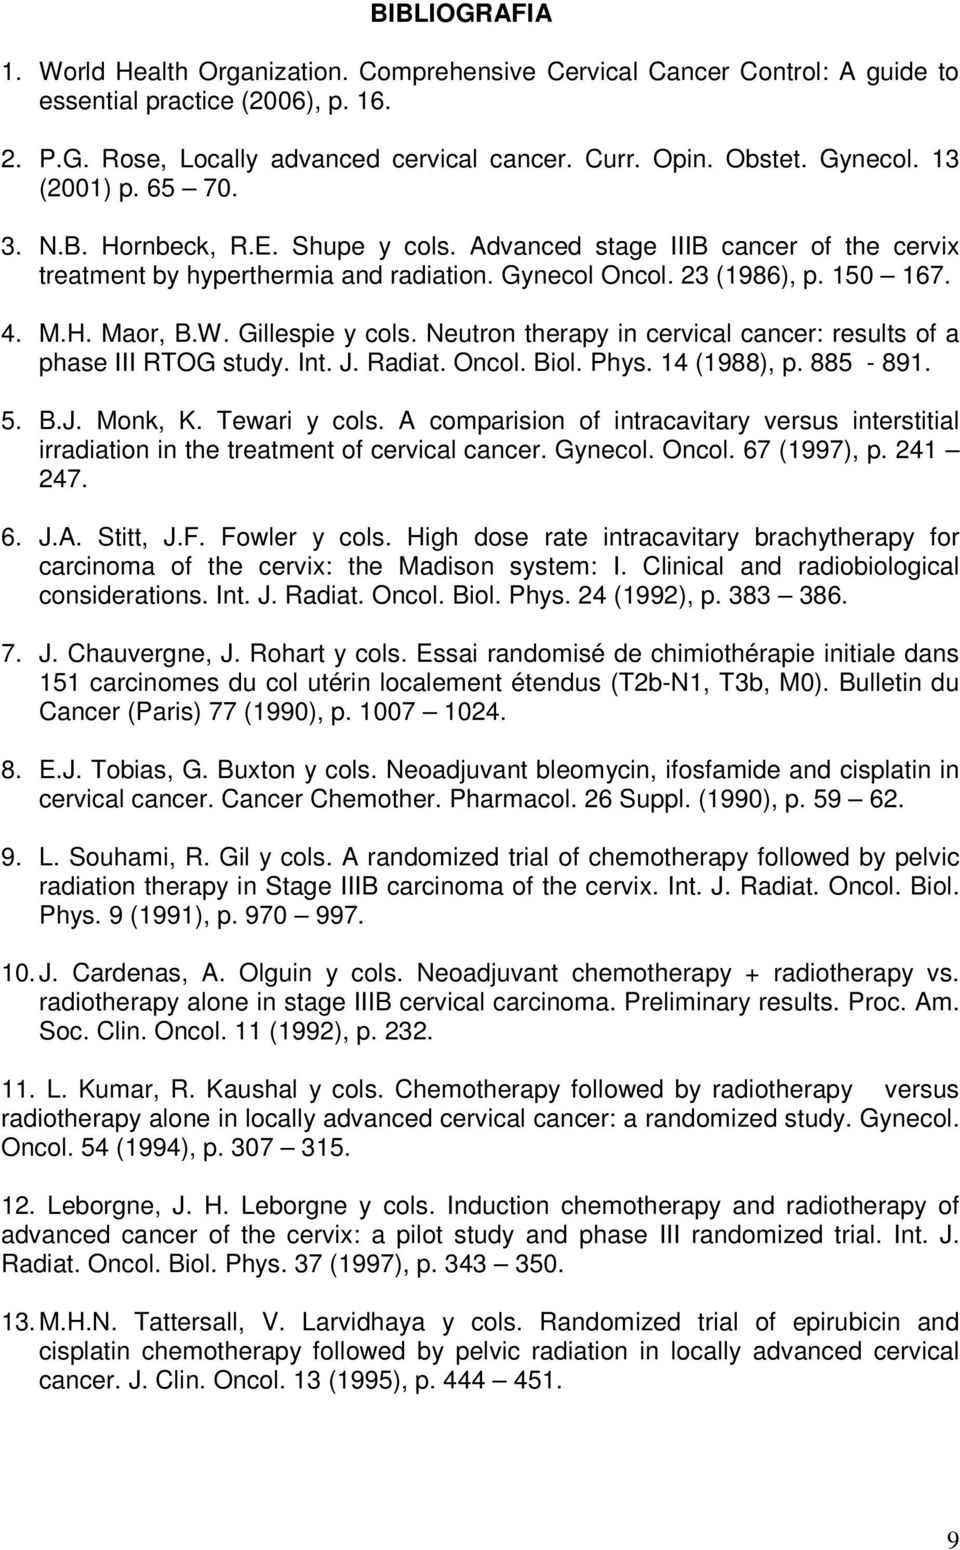 W. Gillespie y cols. Neutron therapy in cervical cancer: results of a phase III RTOG study. Int. J. Radiat. Oncol. Biol. Phys. 14 (1988), p. 885-891. 5. B.J. Monk, K. Tewari y cols.